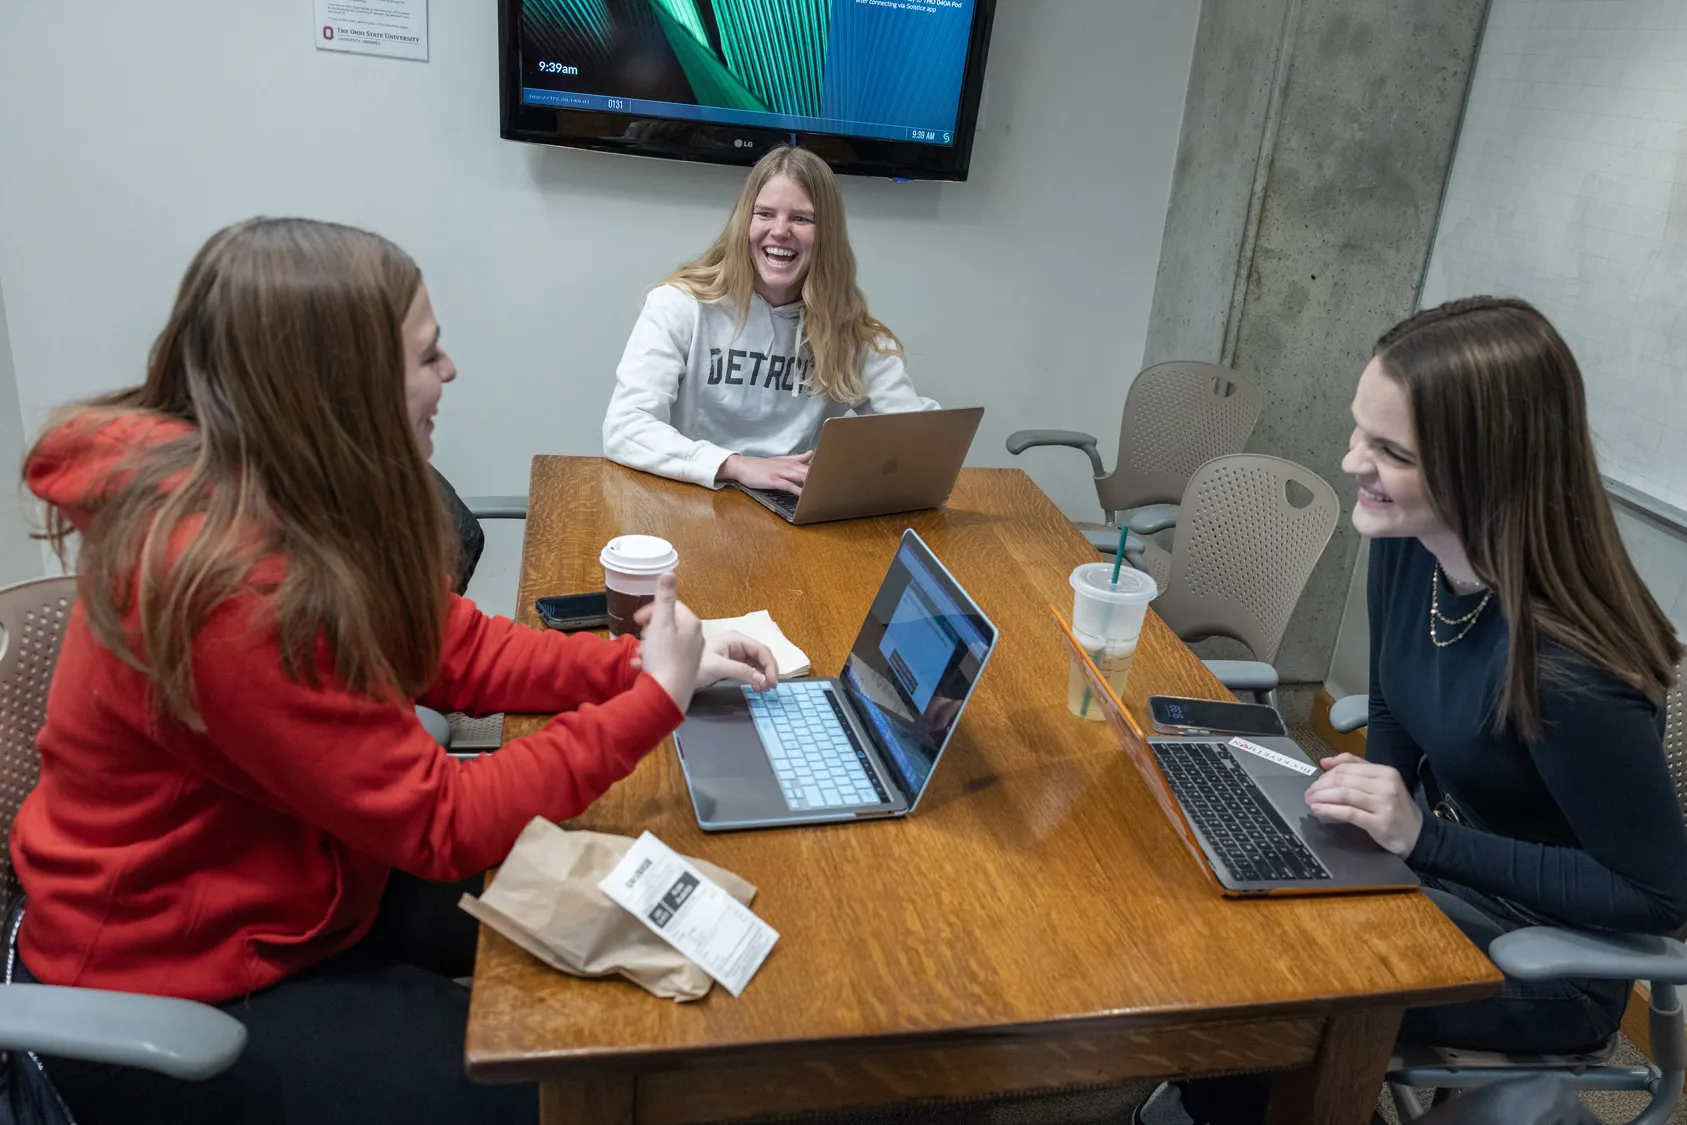 Inside a small meeting room with a screen on the wall, three young white women sit at a table, each with an open laptop and a grin, as they talk. They seem to be enjoying the work they are doing together. 